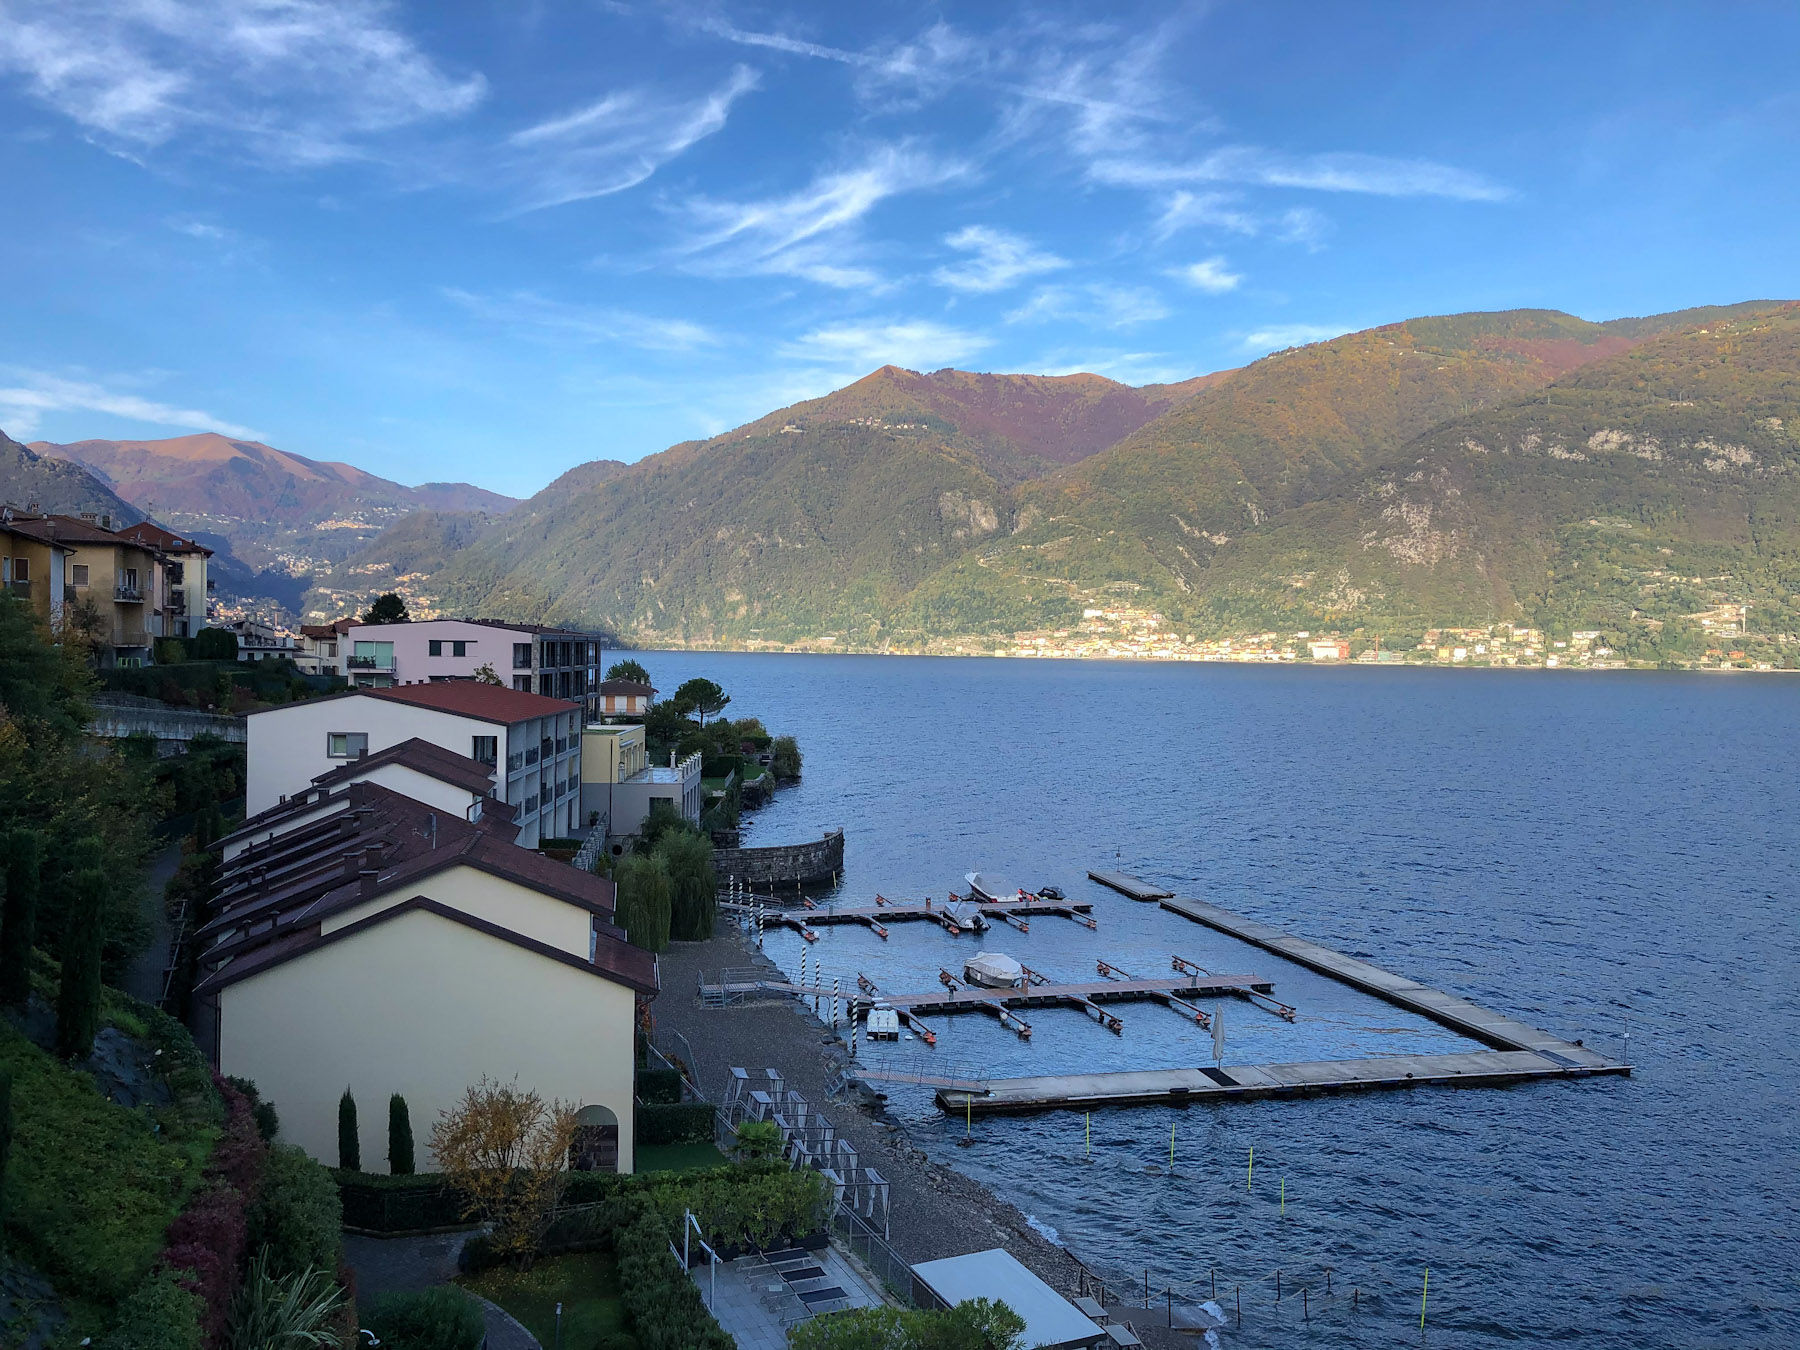 Residences and Private Dock at Filario Hotel on Lake Como, Italy